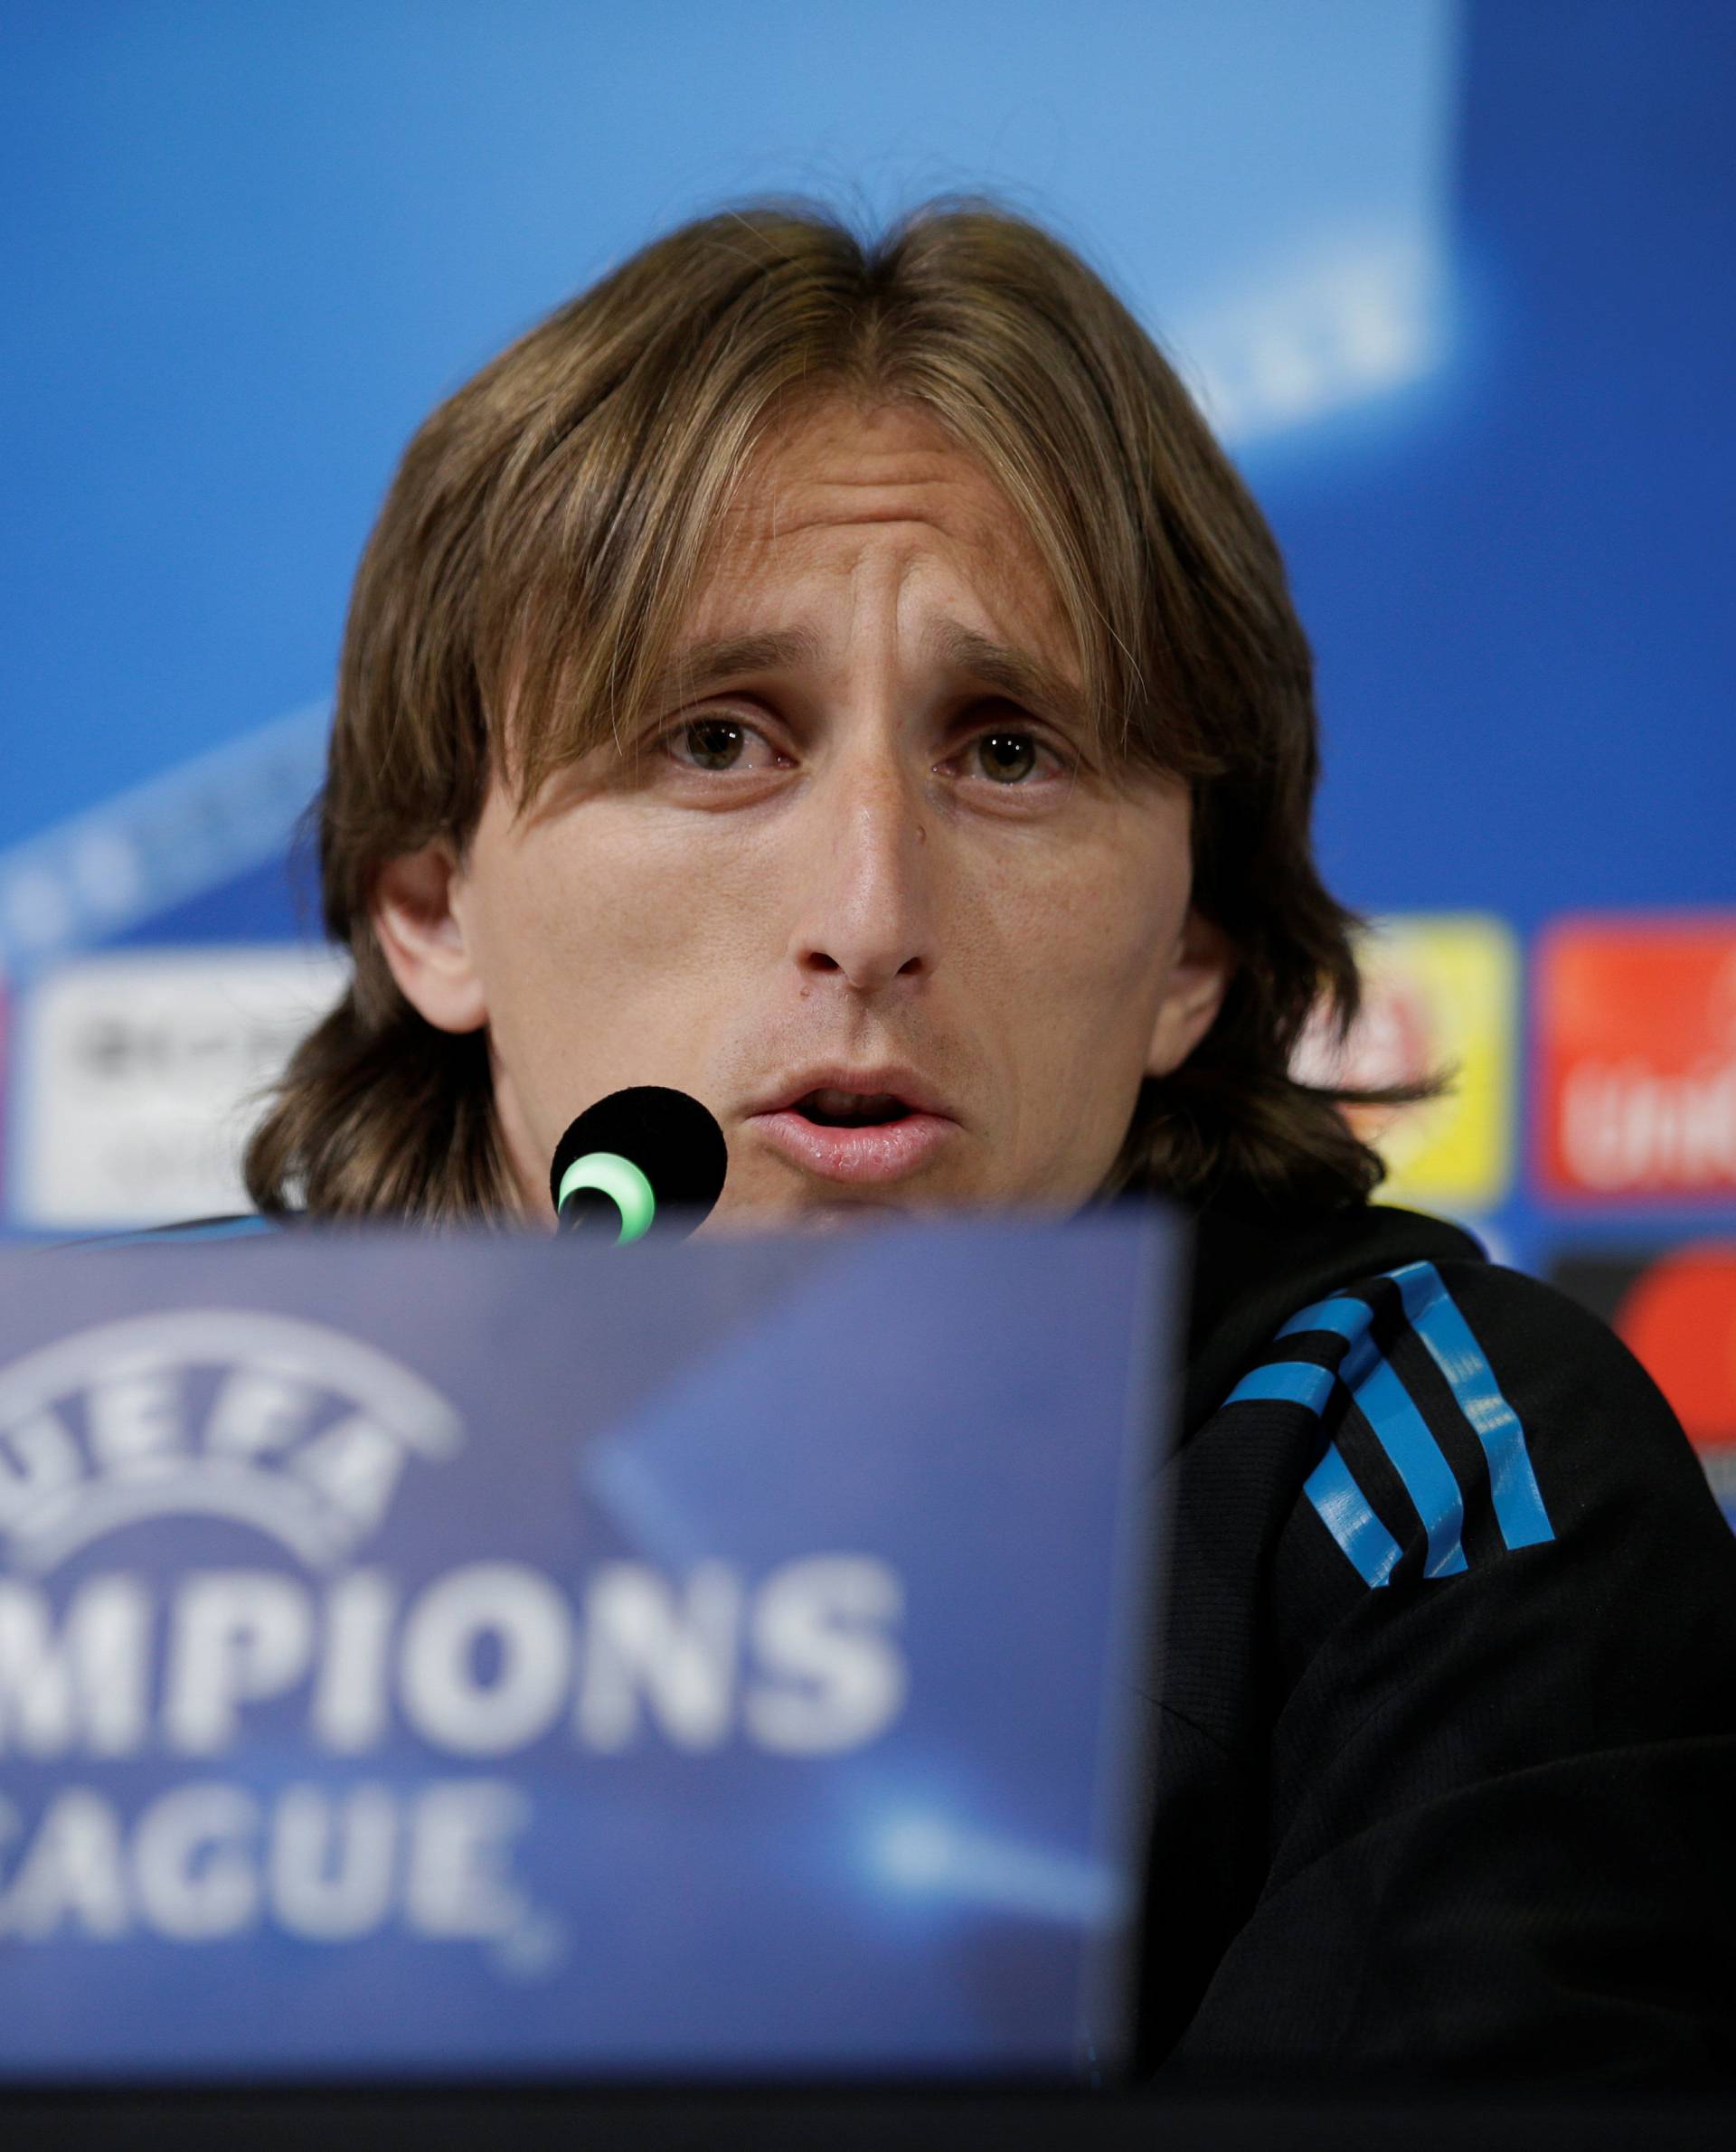 Champions League - Real Madrid Press Conference